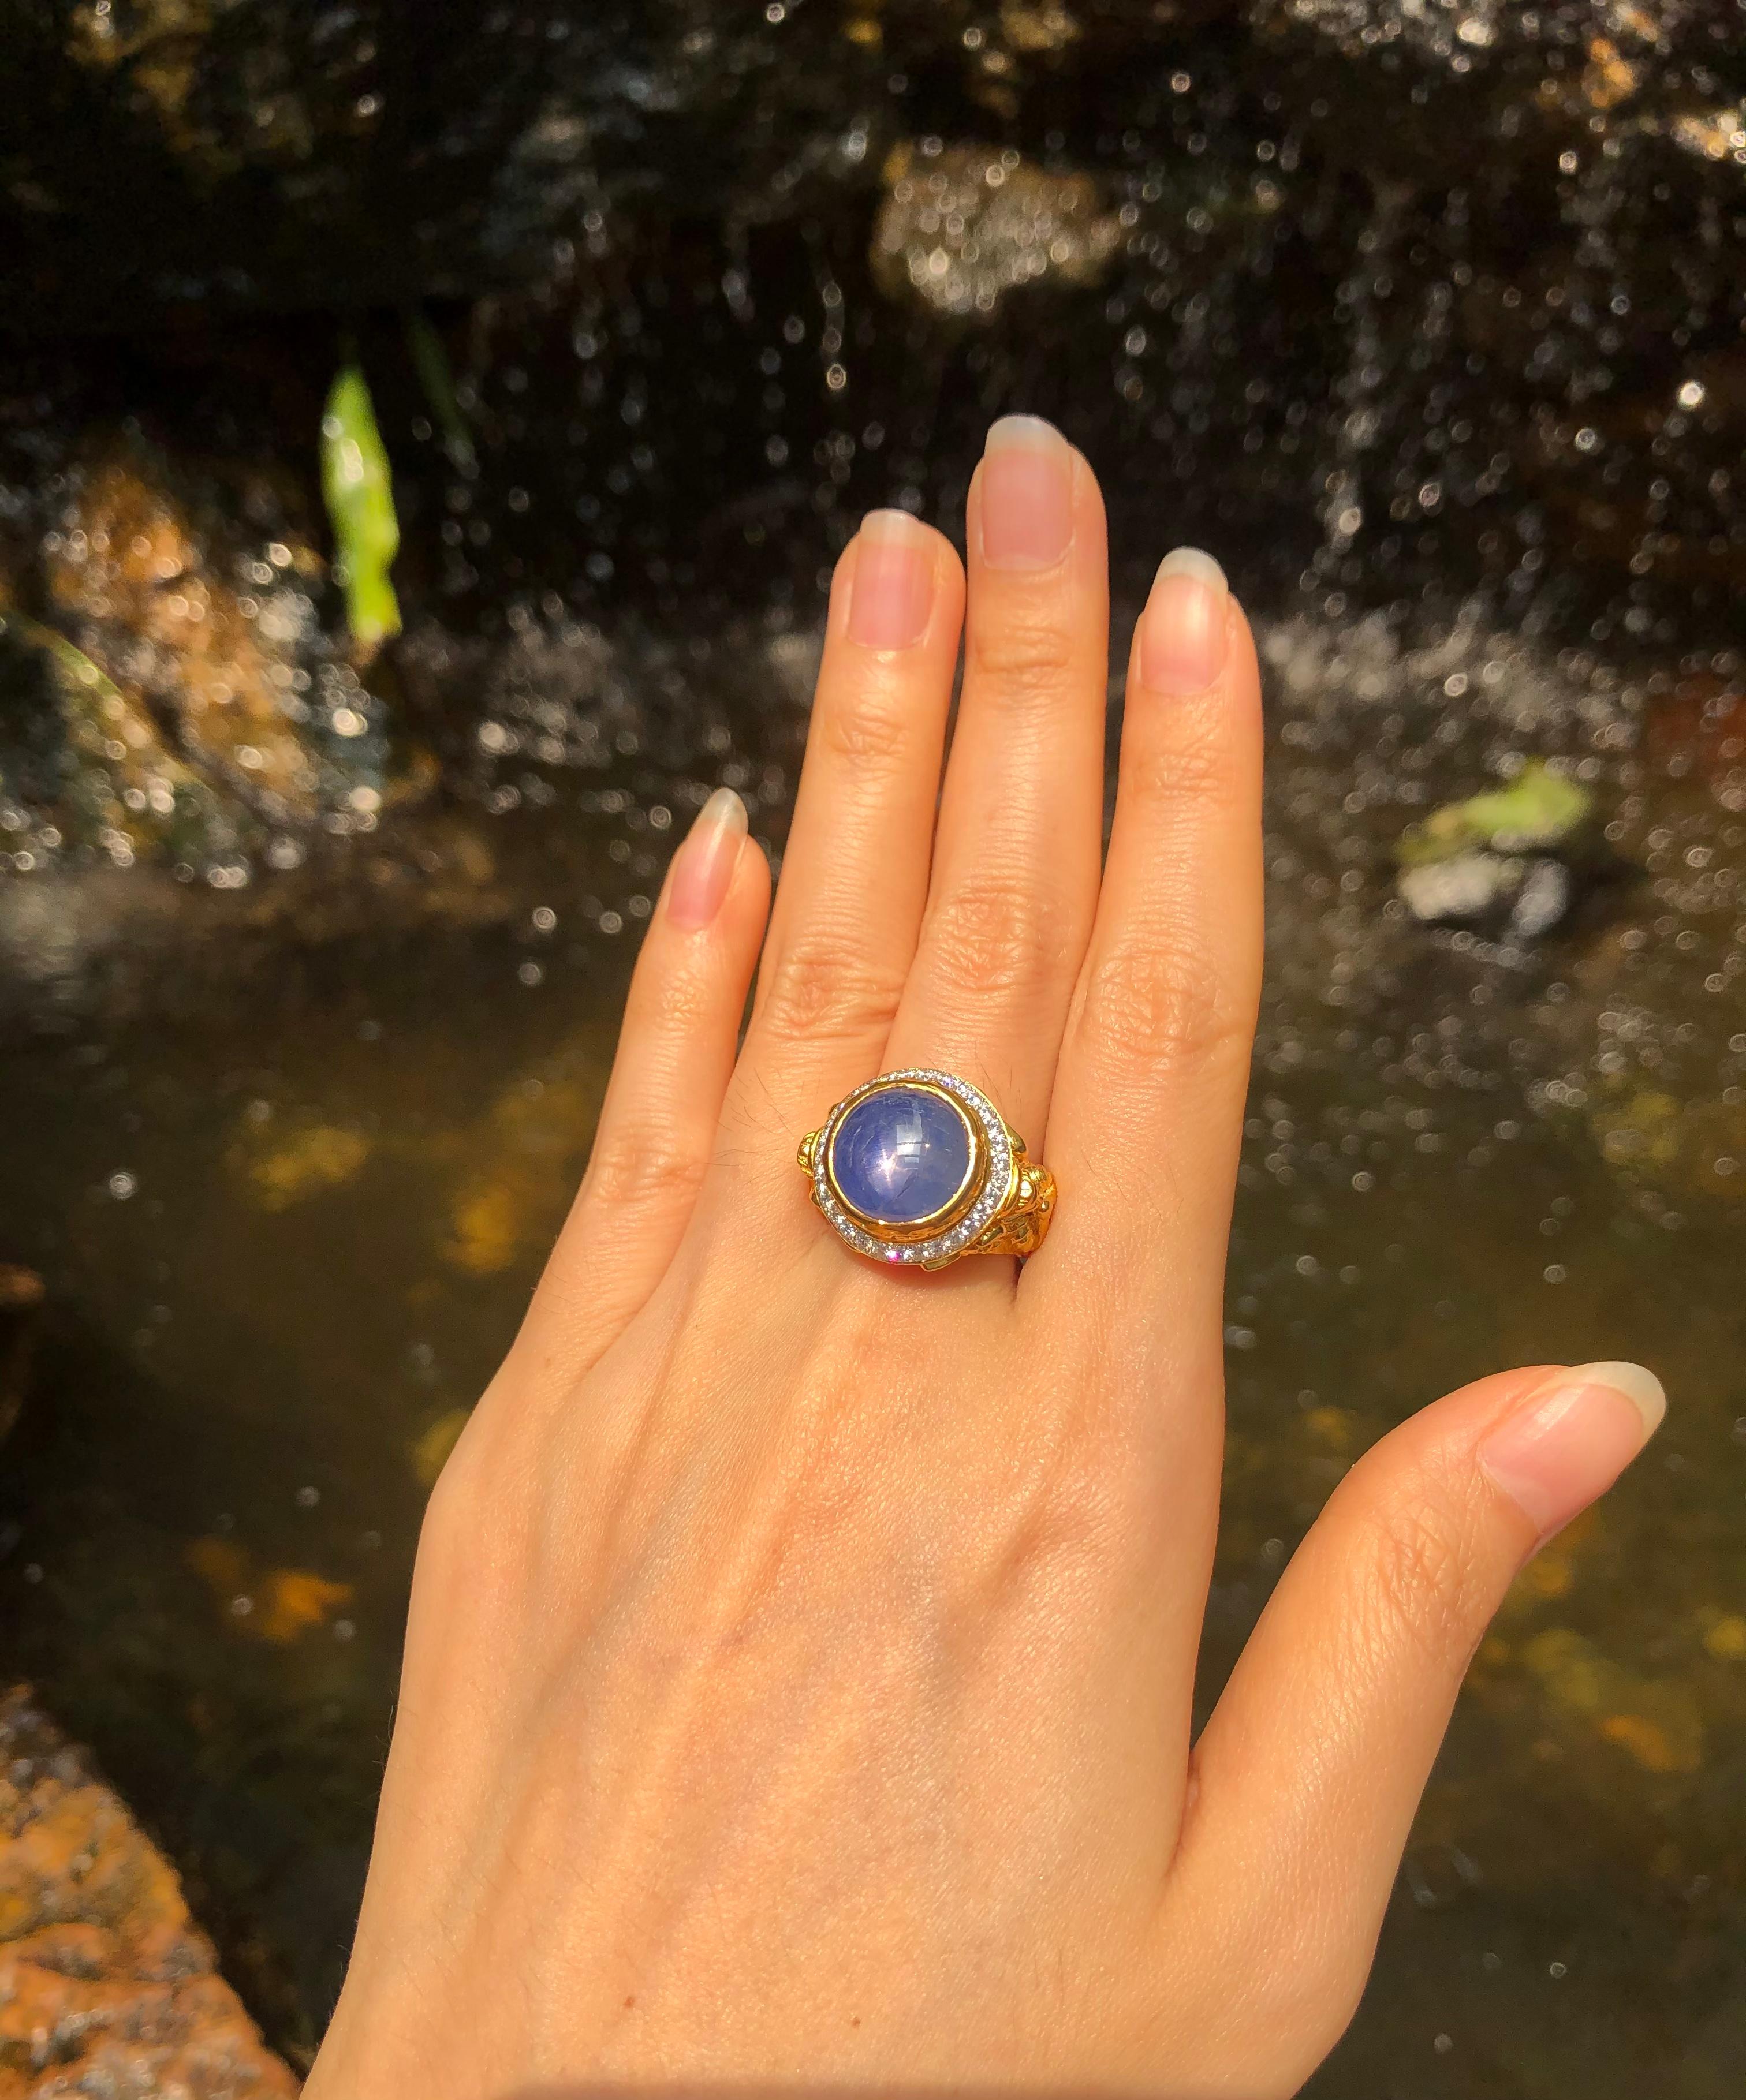 Blue Star Sapphire 12.76 carats with Diamond 0.49 carats Ring set in 18 Karat Gold Settings

Width:  1.9 cm 
Length: 1.9 cm
Ring Size: 53
Total Weight: 23.32grams

